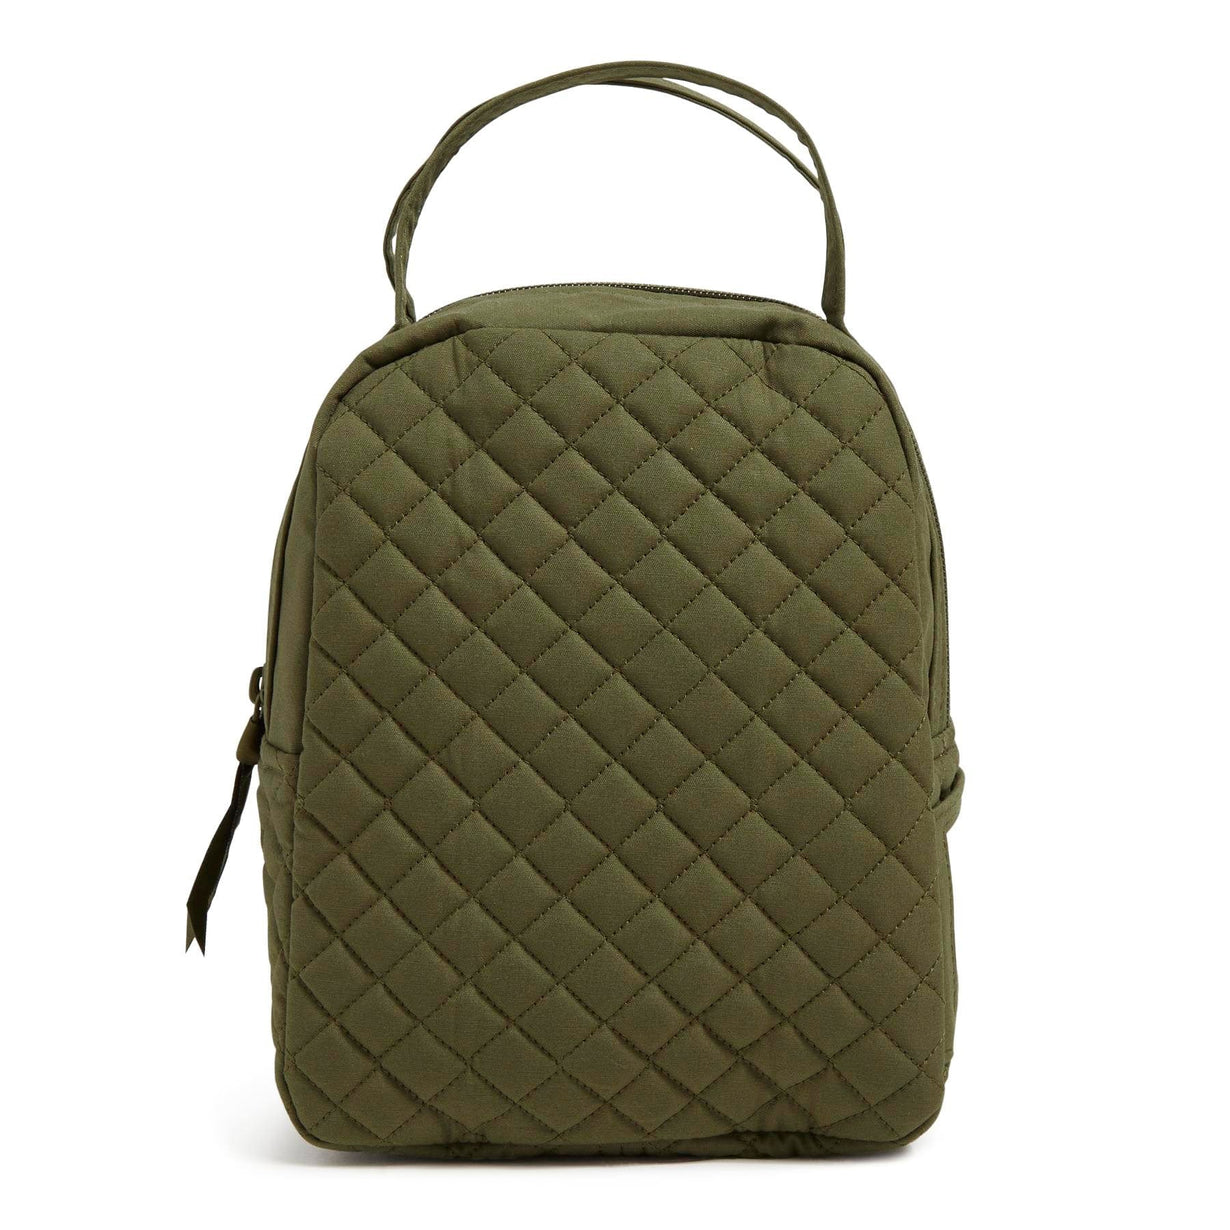 Lunch bag in green quilted cotton fabric